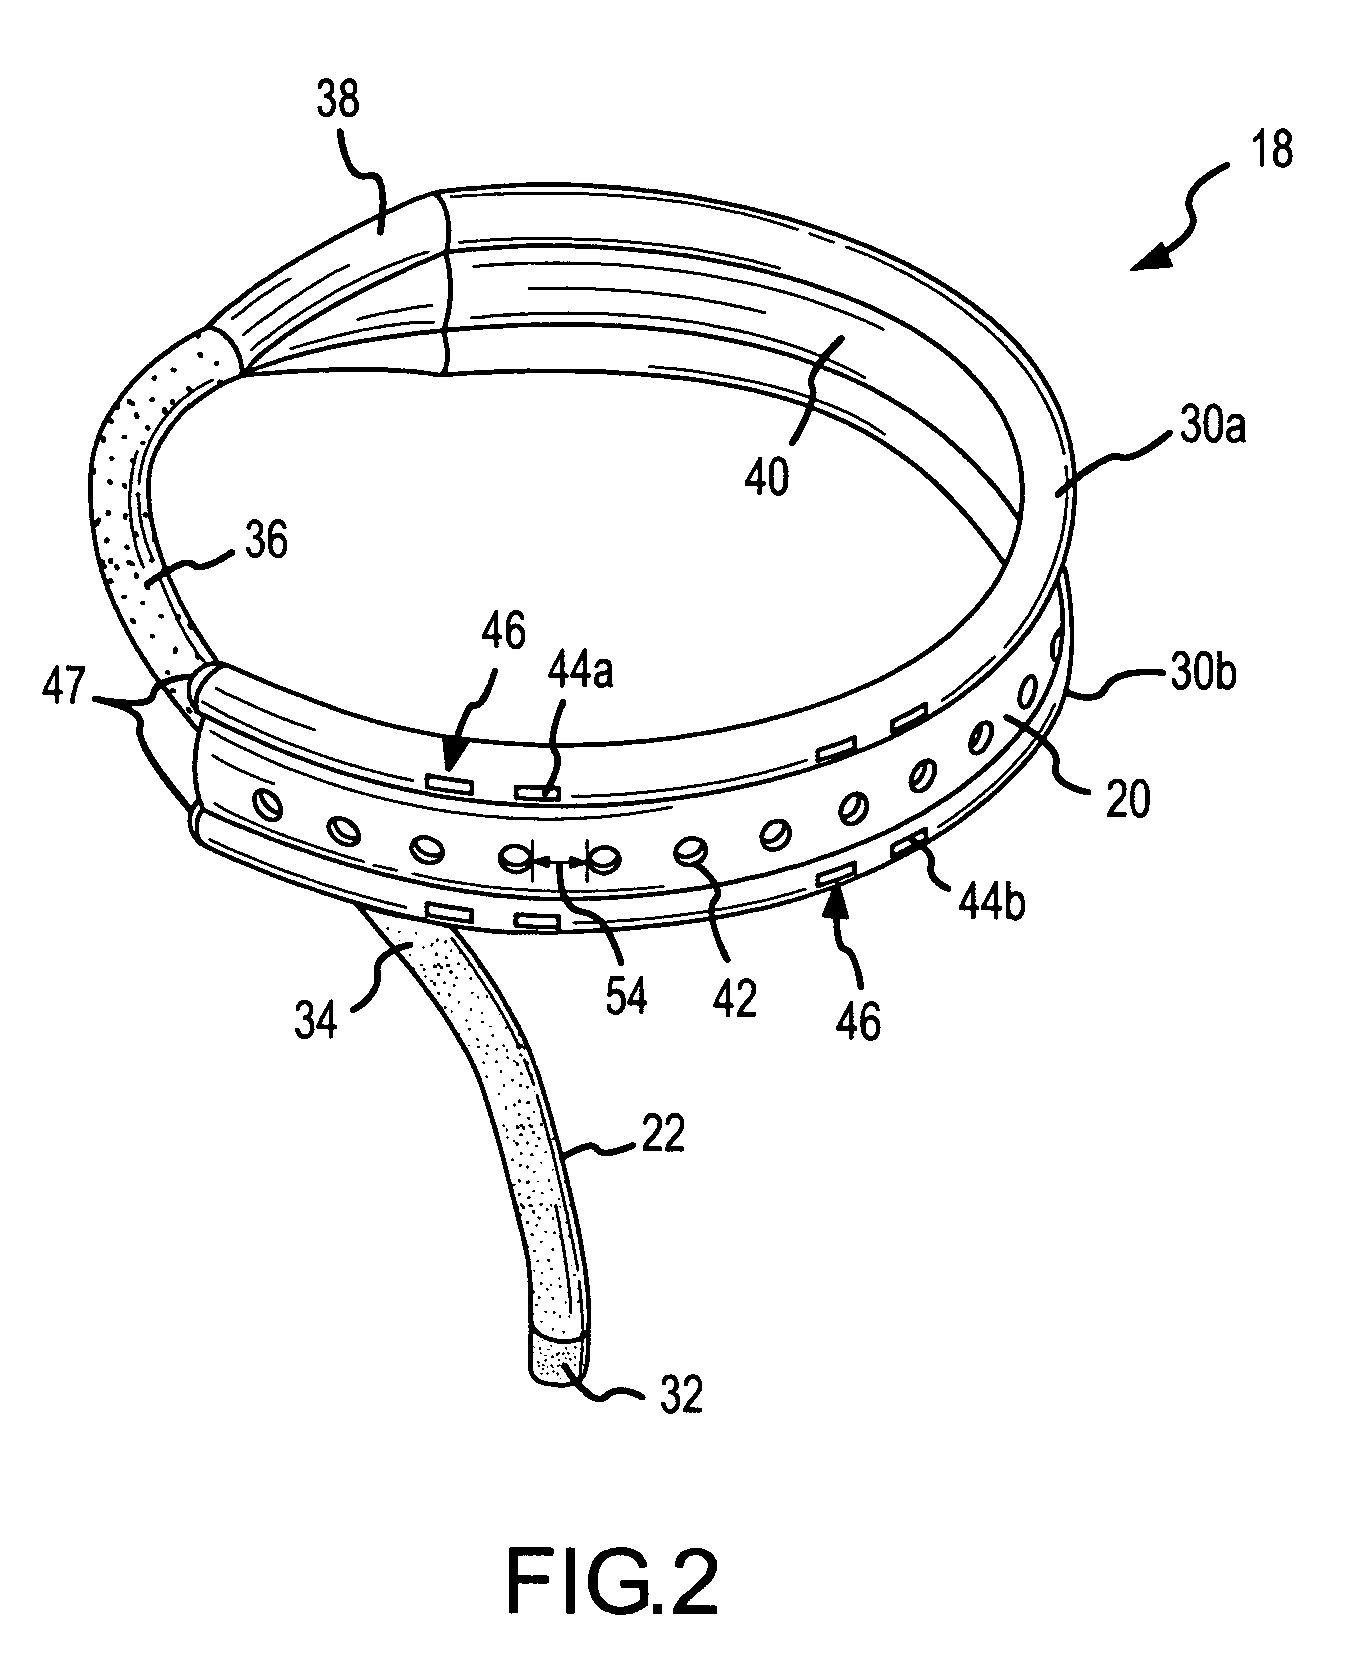 Catheter with bifurcated, collapsible tip for sensing and ablating